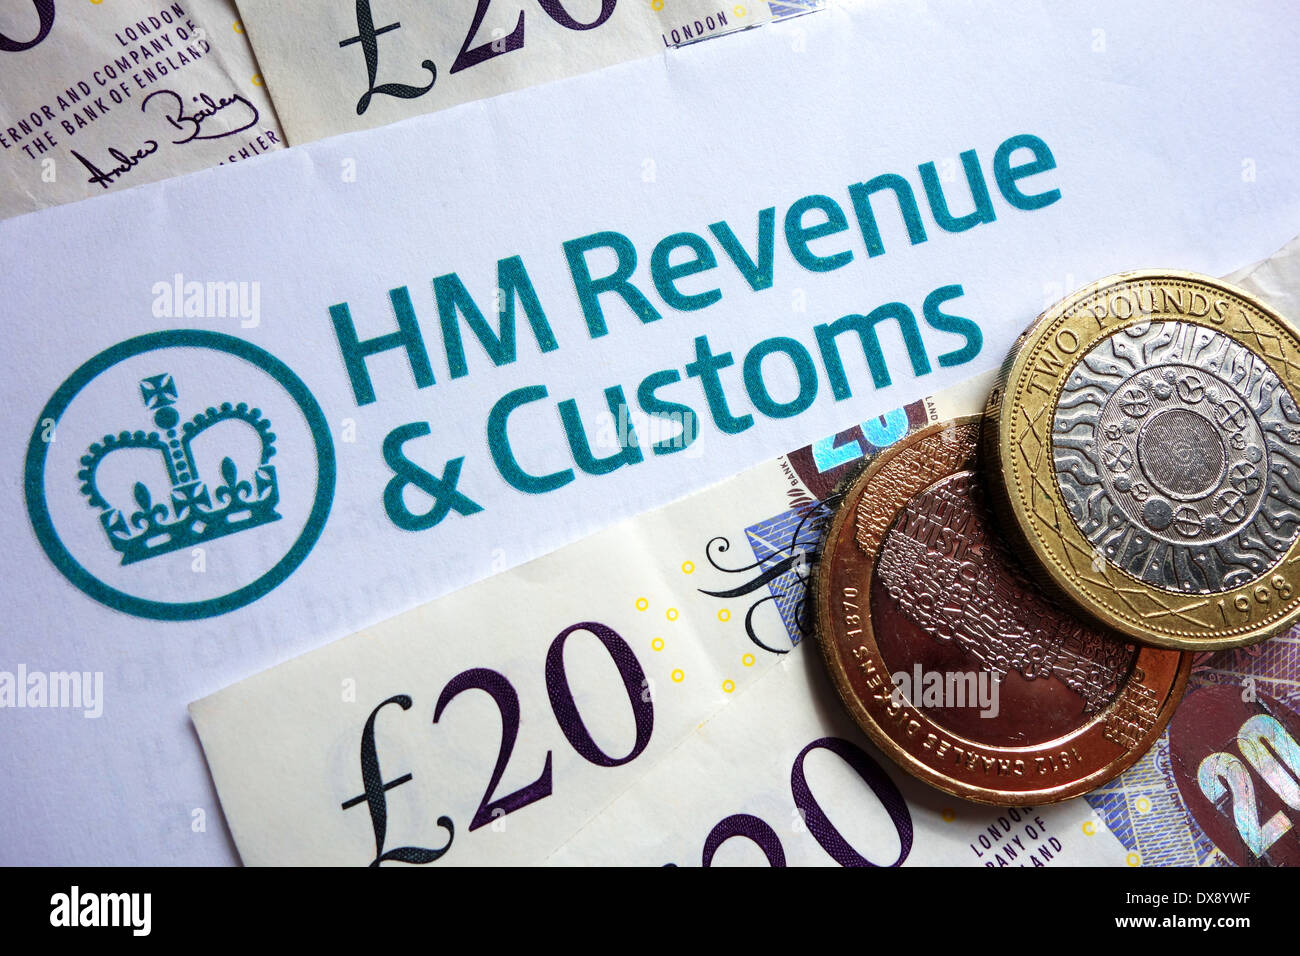 HMRC form and coins Stock Photo